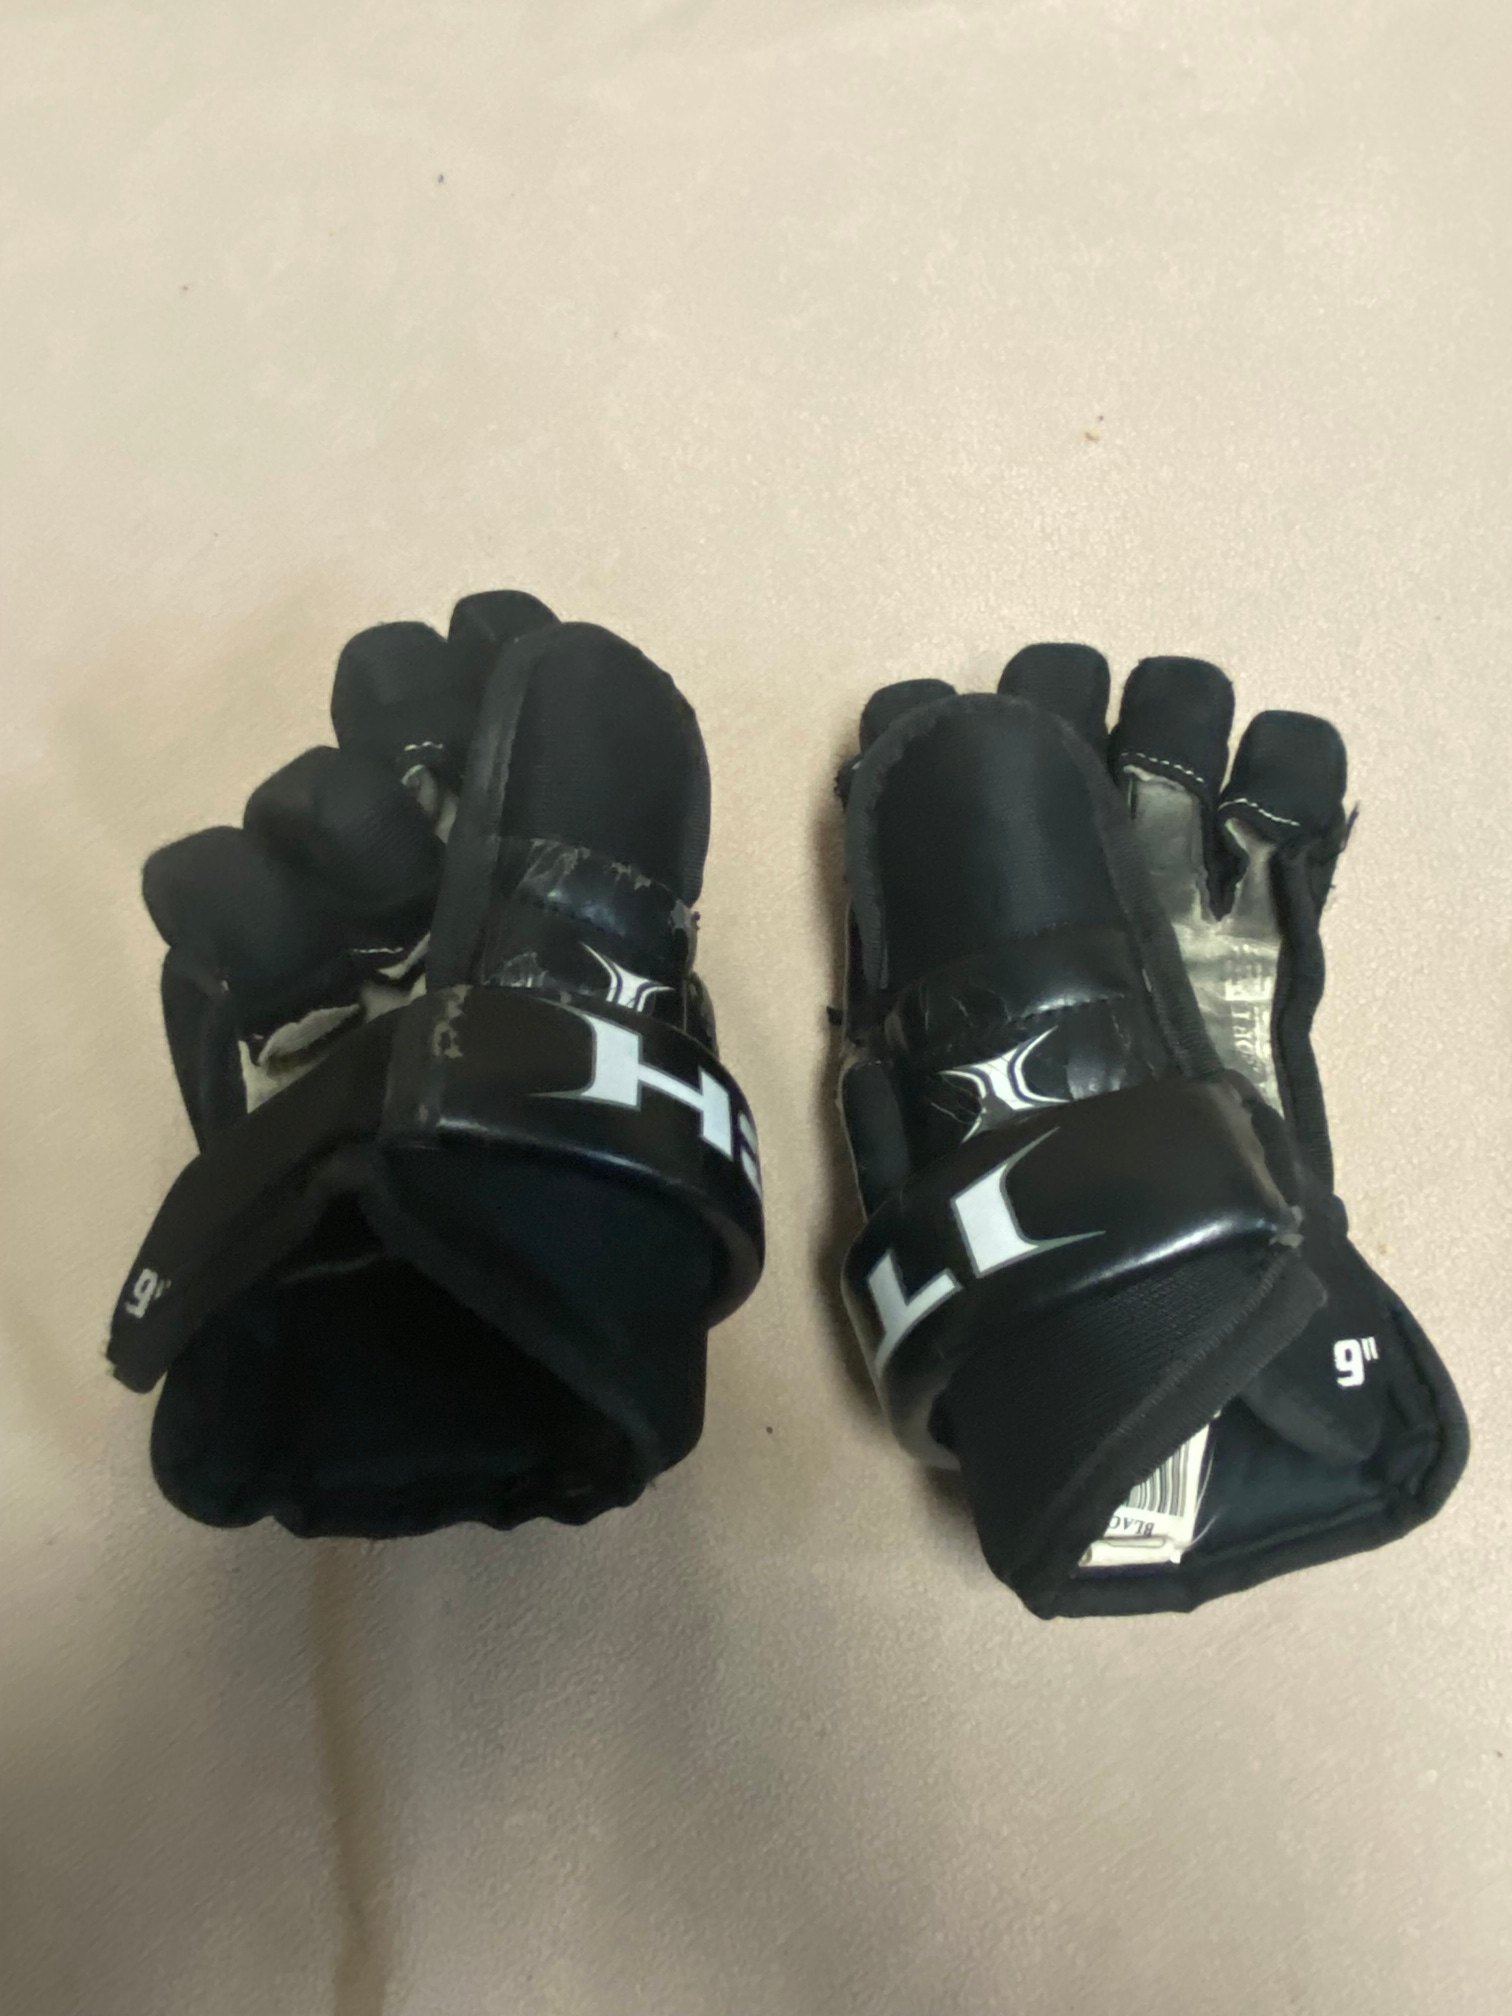 Used Itech HG100 Gloves 9"